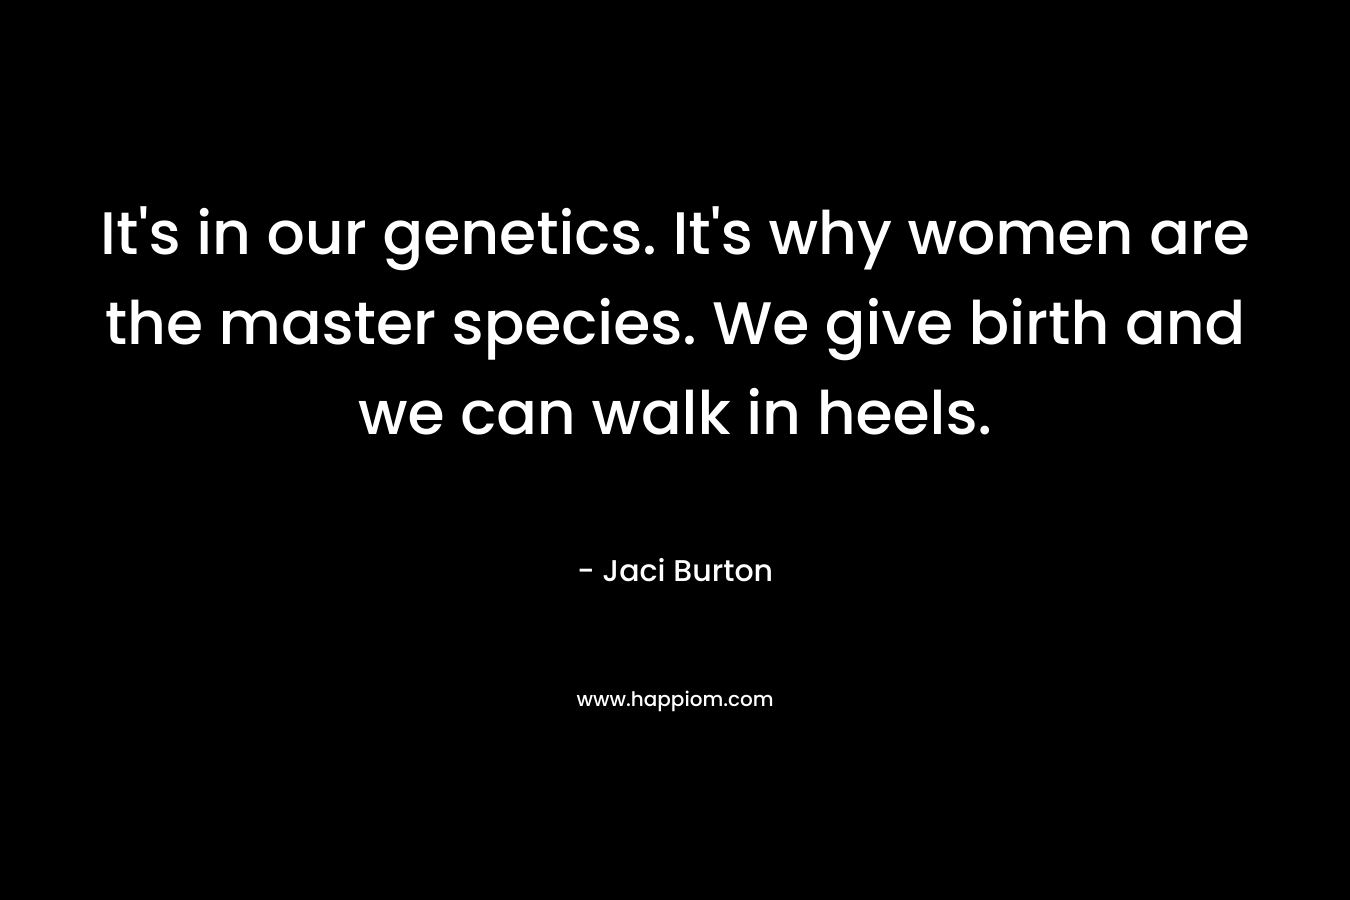 It’s in our genetics. It’s why women are the master species. We give birth and we can walk in heels. – Jaci Burton